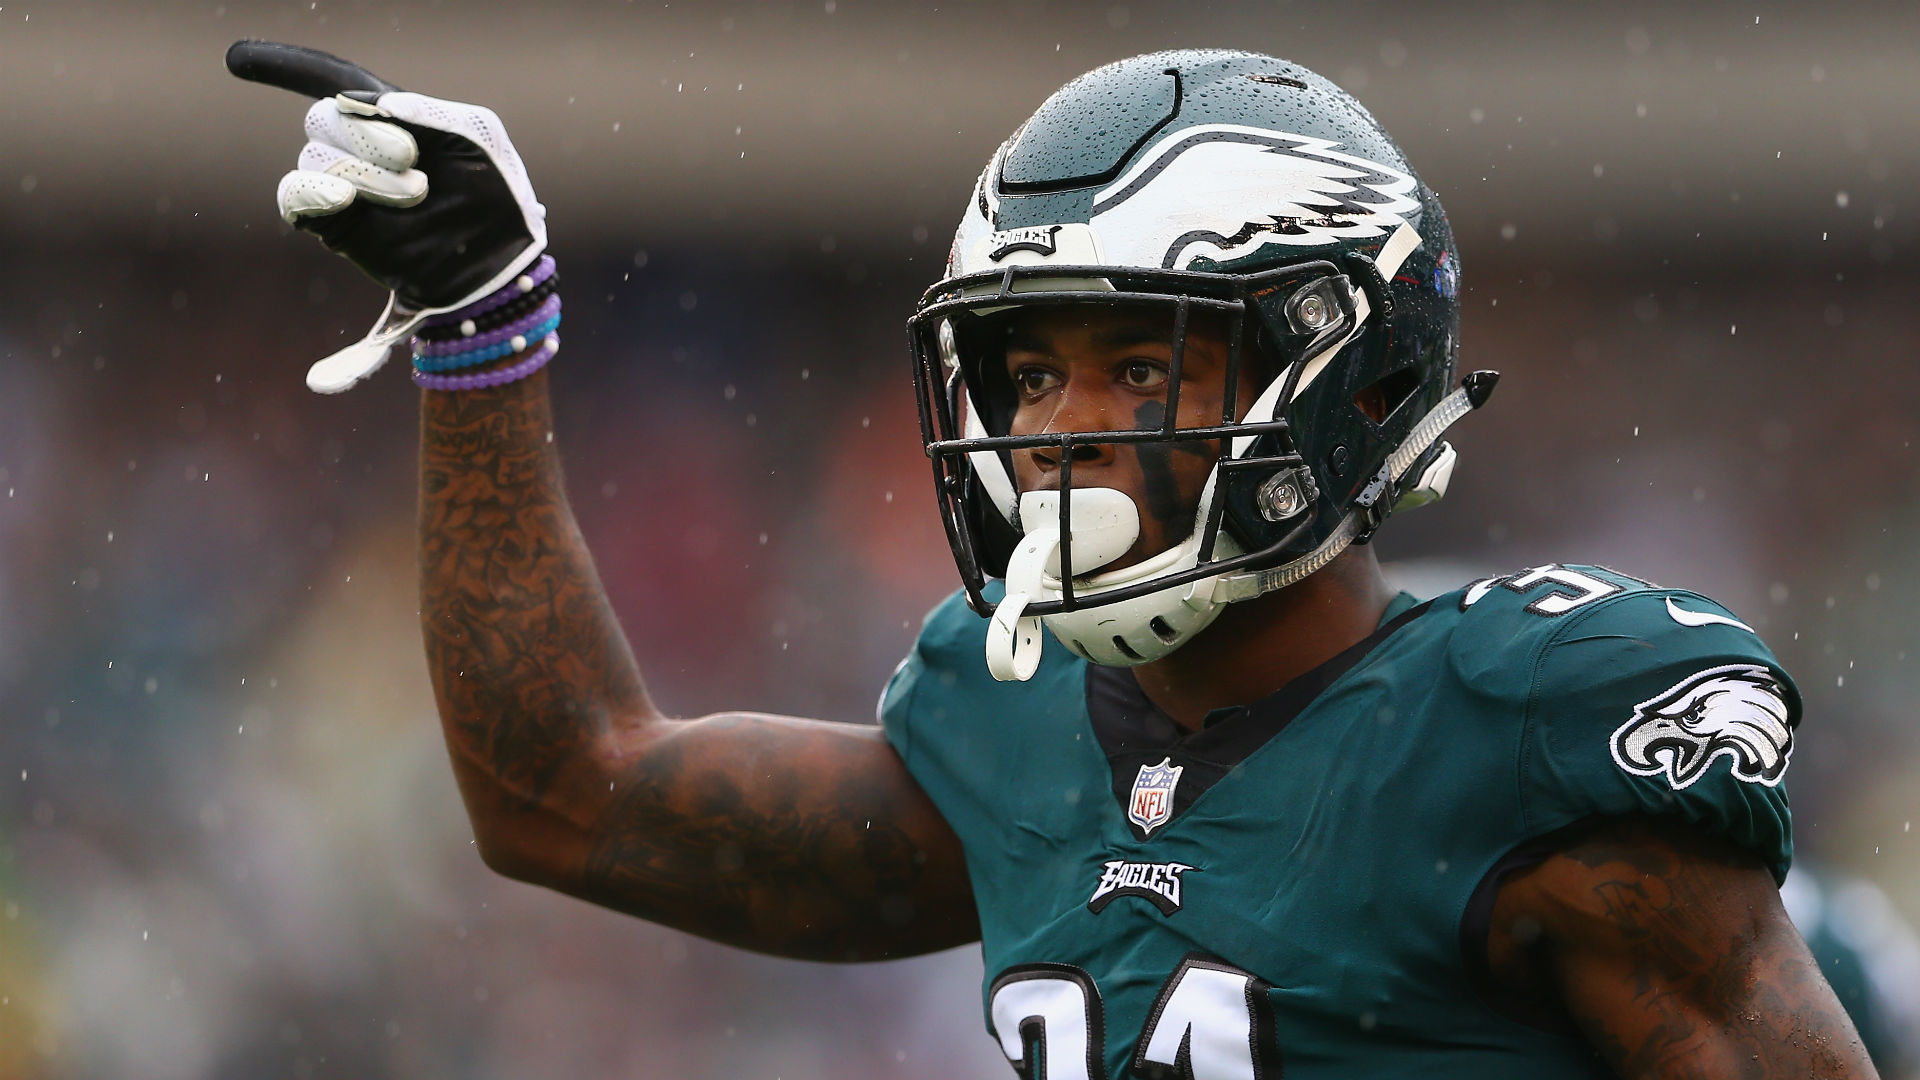 Eagles’ Jalen Mills arrested after fight with NBA player